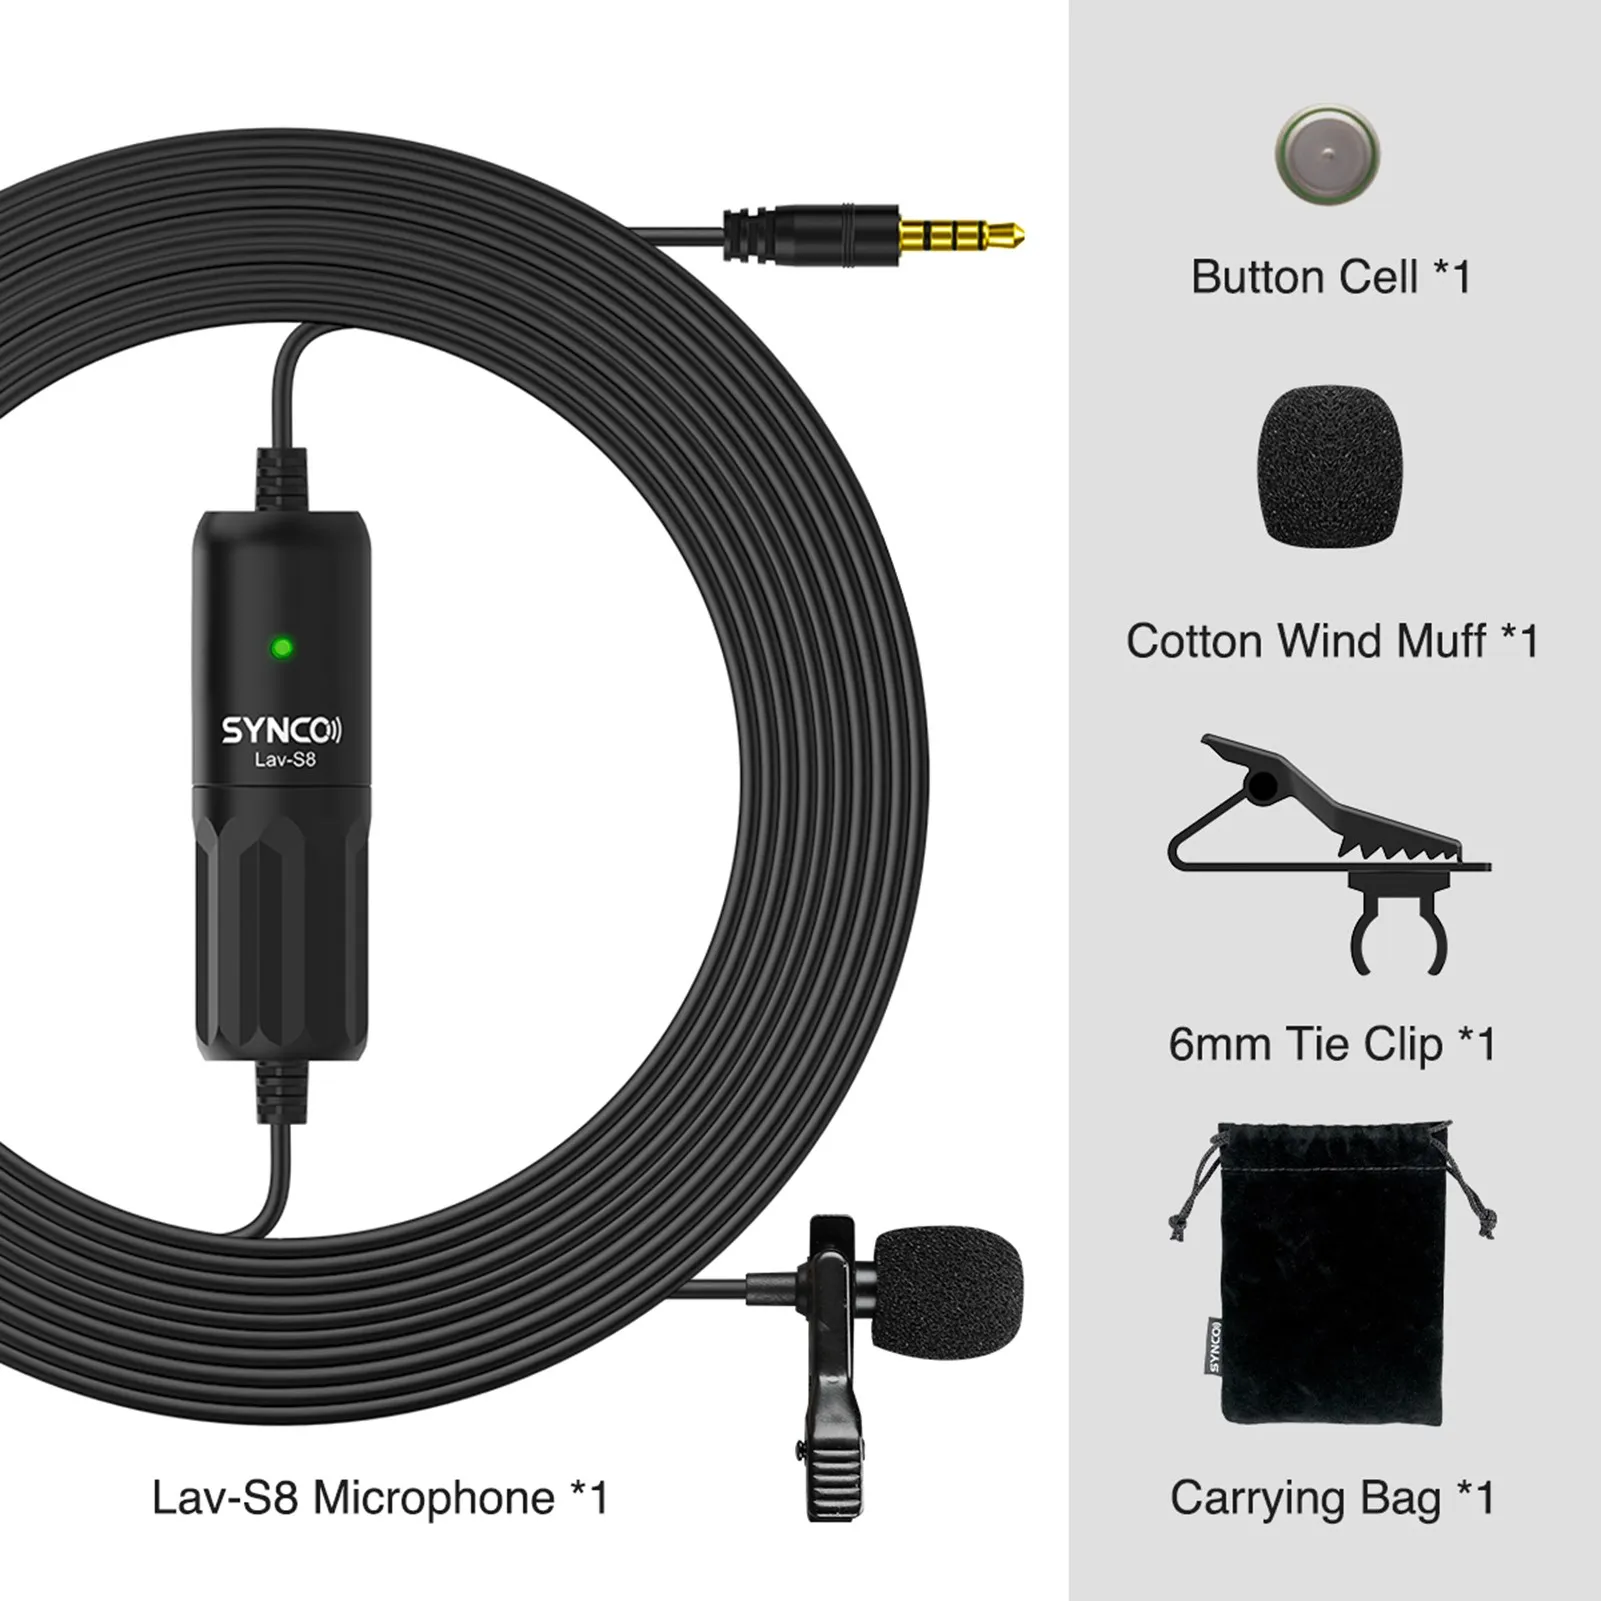 best usb microphone SYNCO LAV-S8 Lapel Microphone Professional 3.5mm TRRS/TRS Wired Audio Lavalier Condensador Microfone Mic VS BOYA BY-M1 Top Gift mics